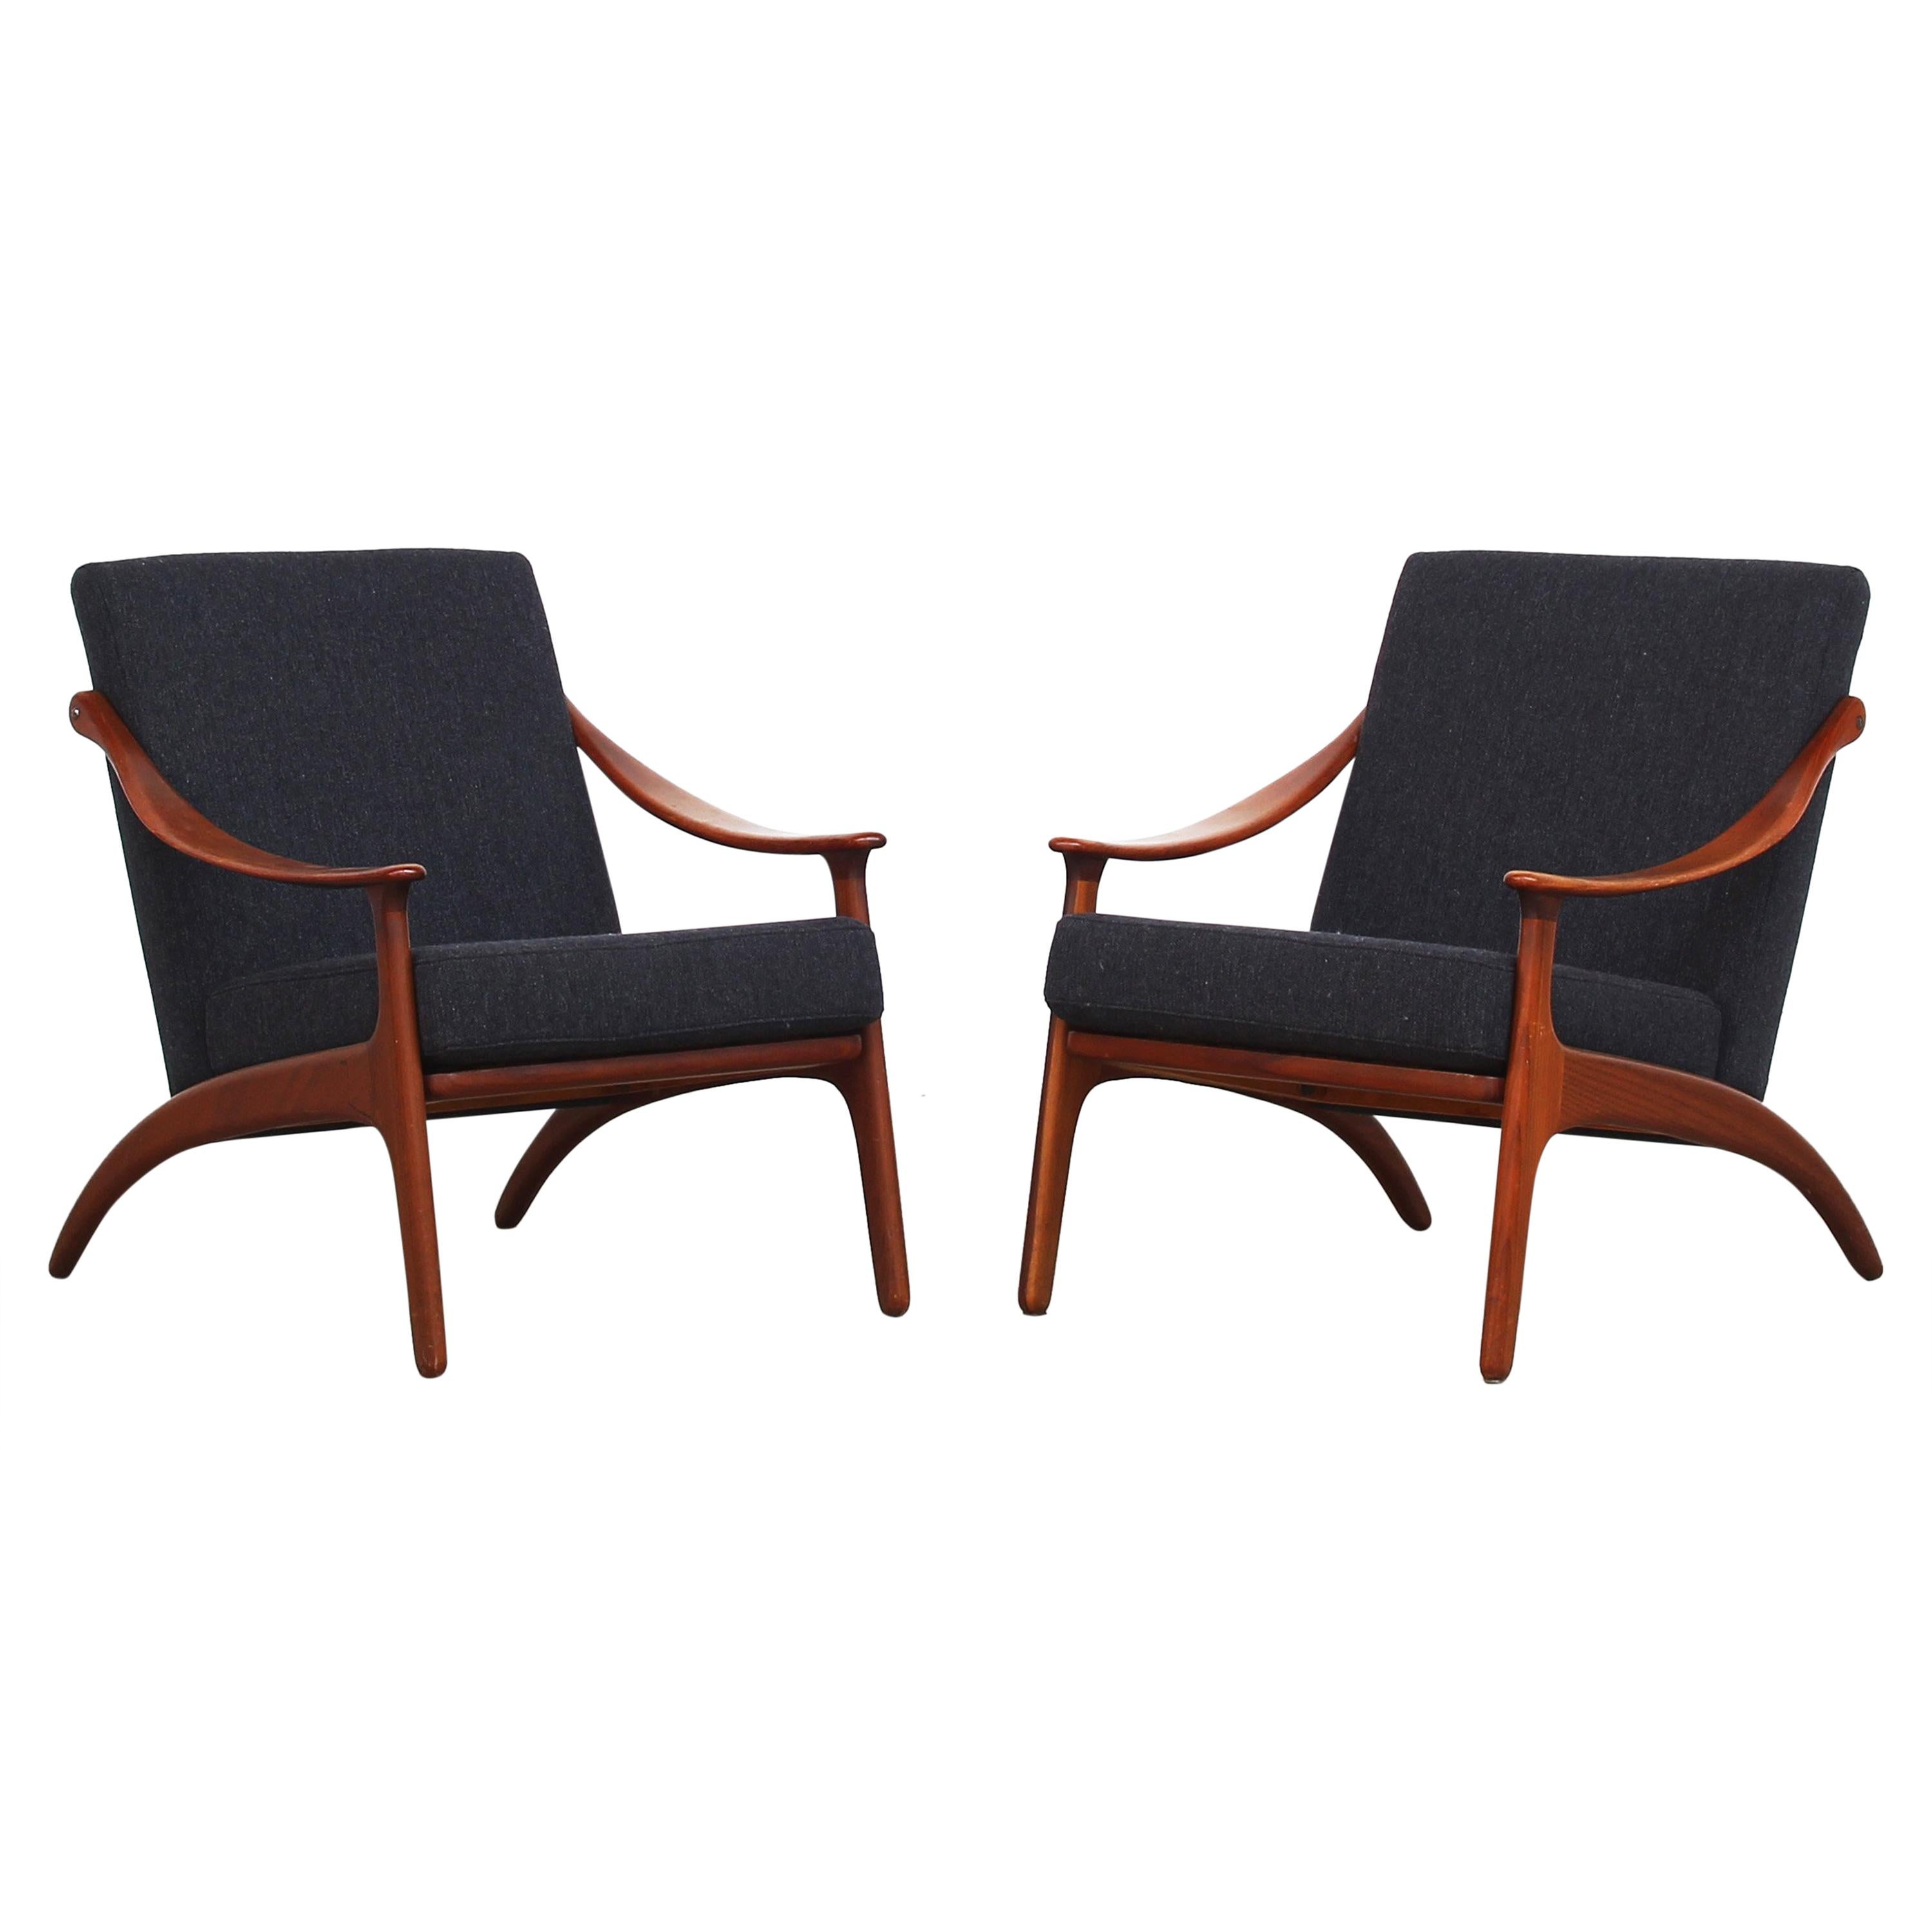 Pair of Lounge Chairs by Arne Hovmand Olsen for Mogens Kold Newly Reupholstered